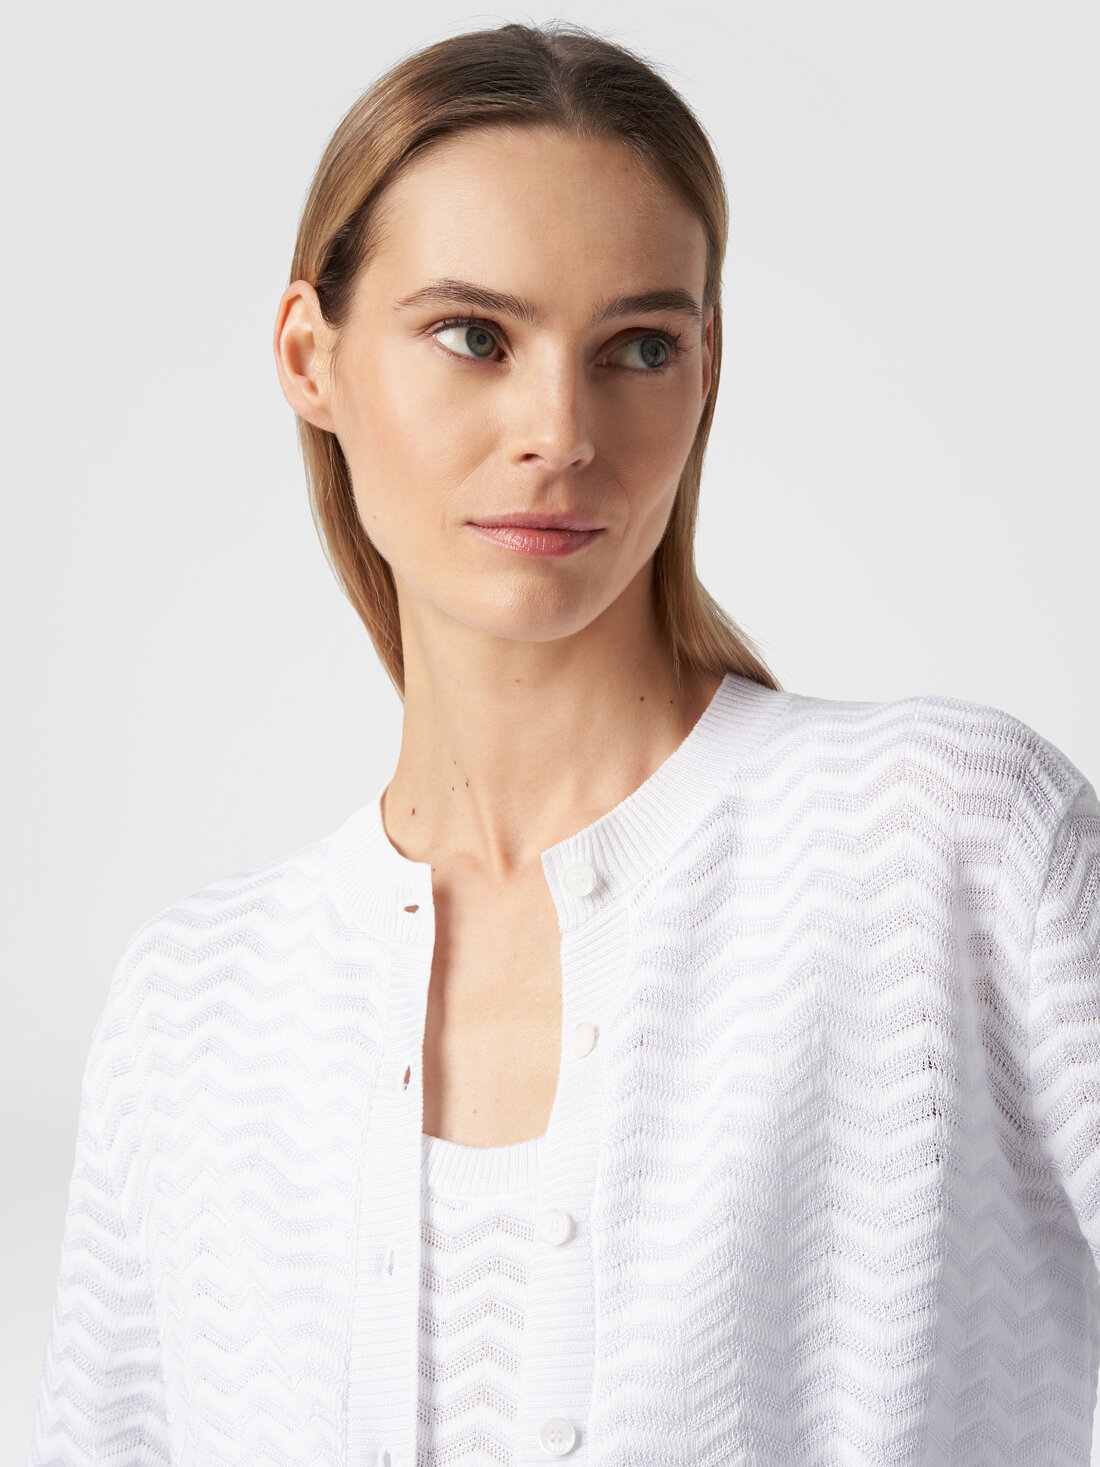 Cardigan in chevron cotton and viscose knit, White  - DS24SM0MBK033W14001 - 4